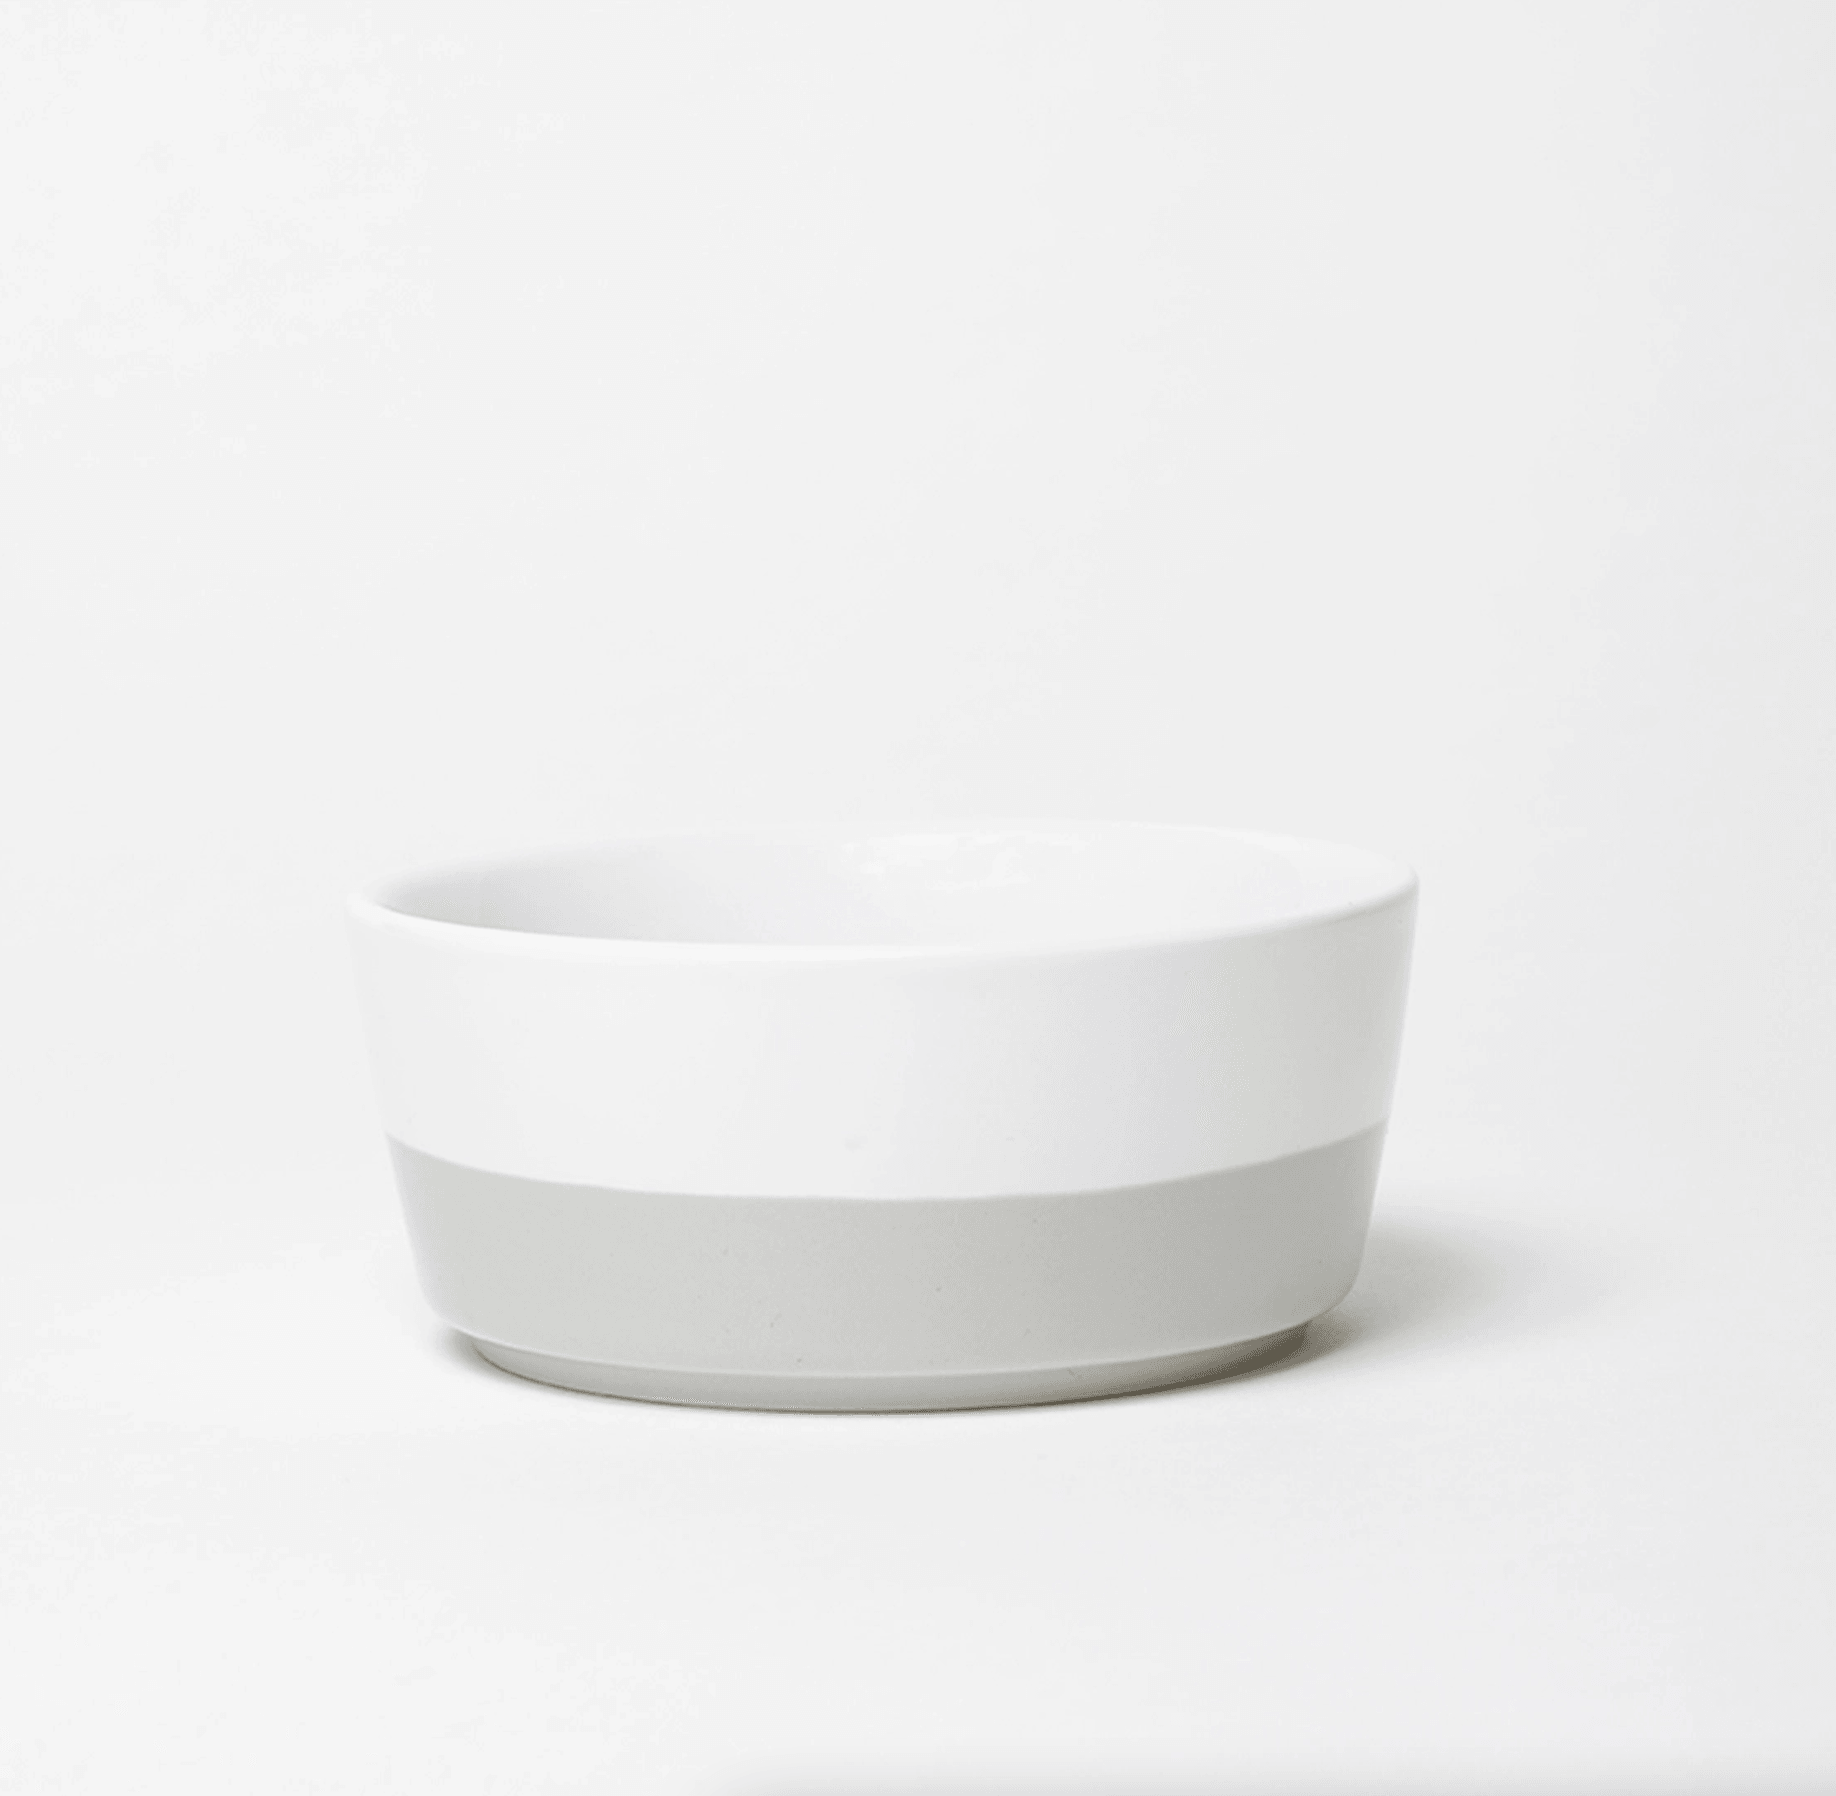 Ceramic Dog Bowl in Light Grey by Waggo - Haven